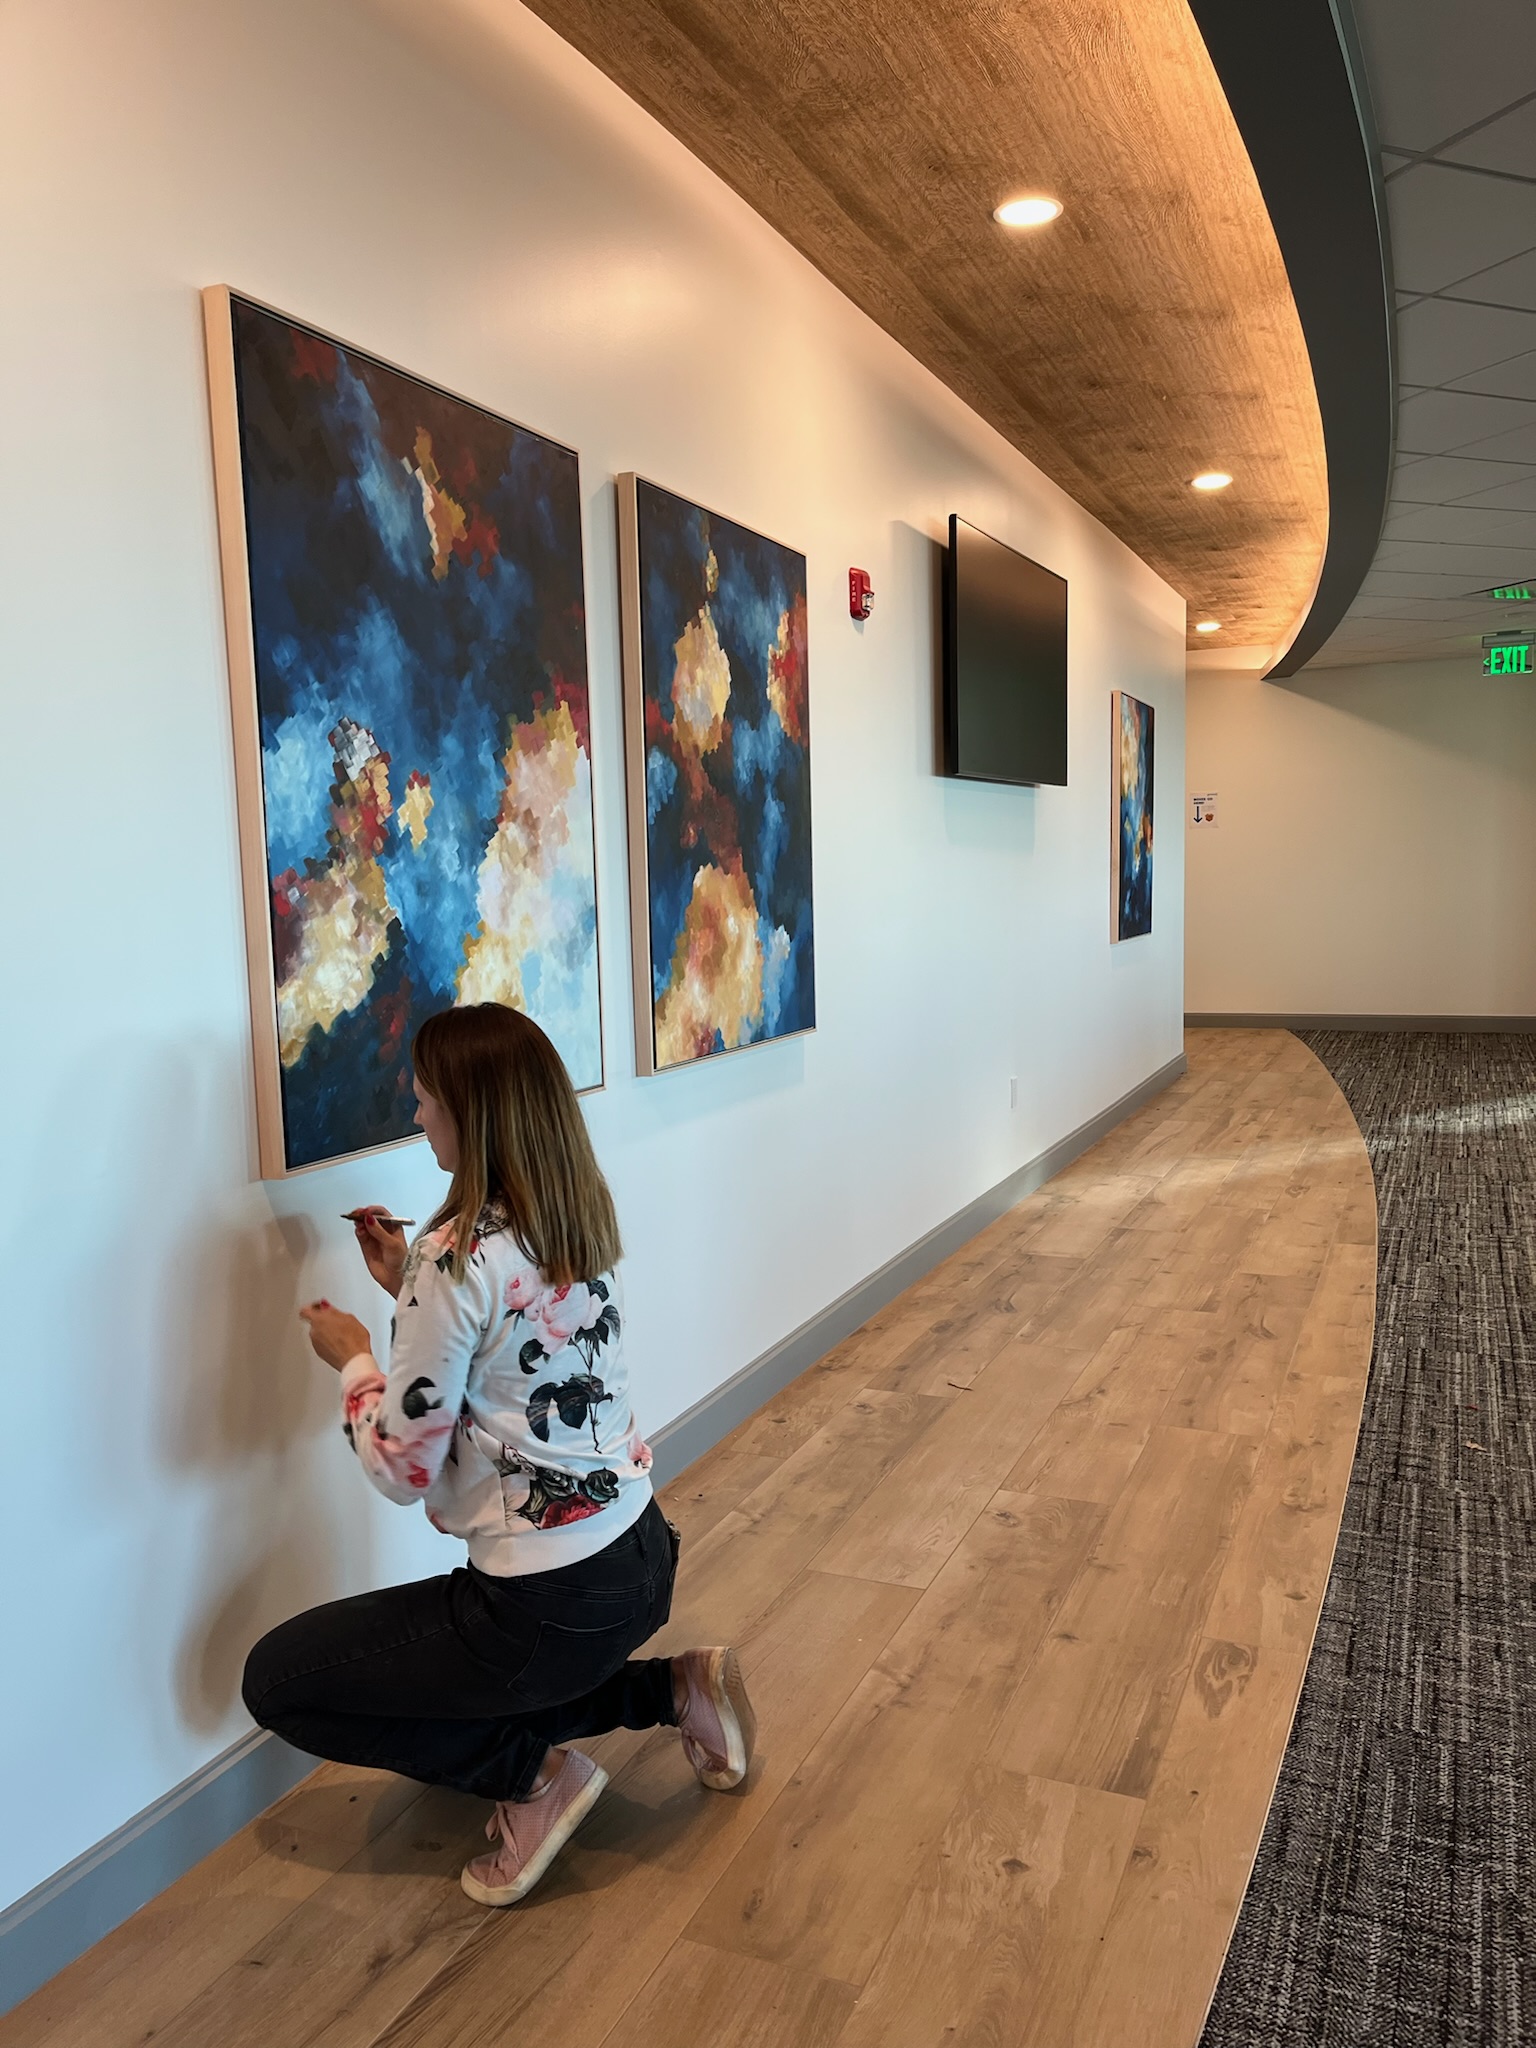 Hanging artwork in a professional office space